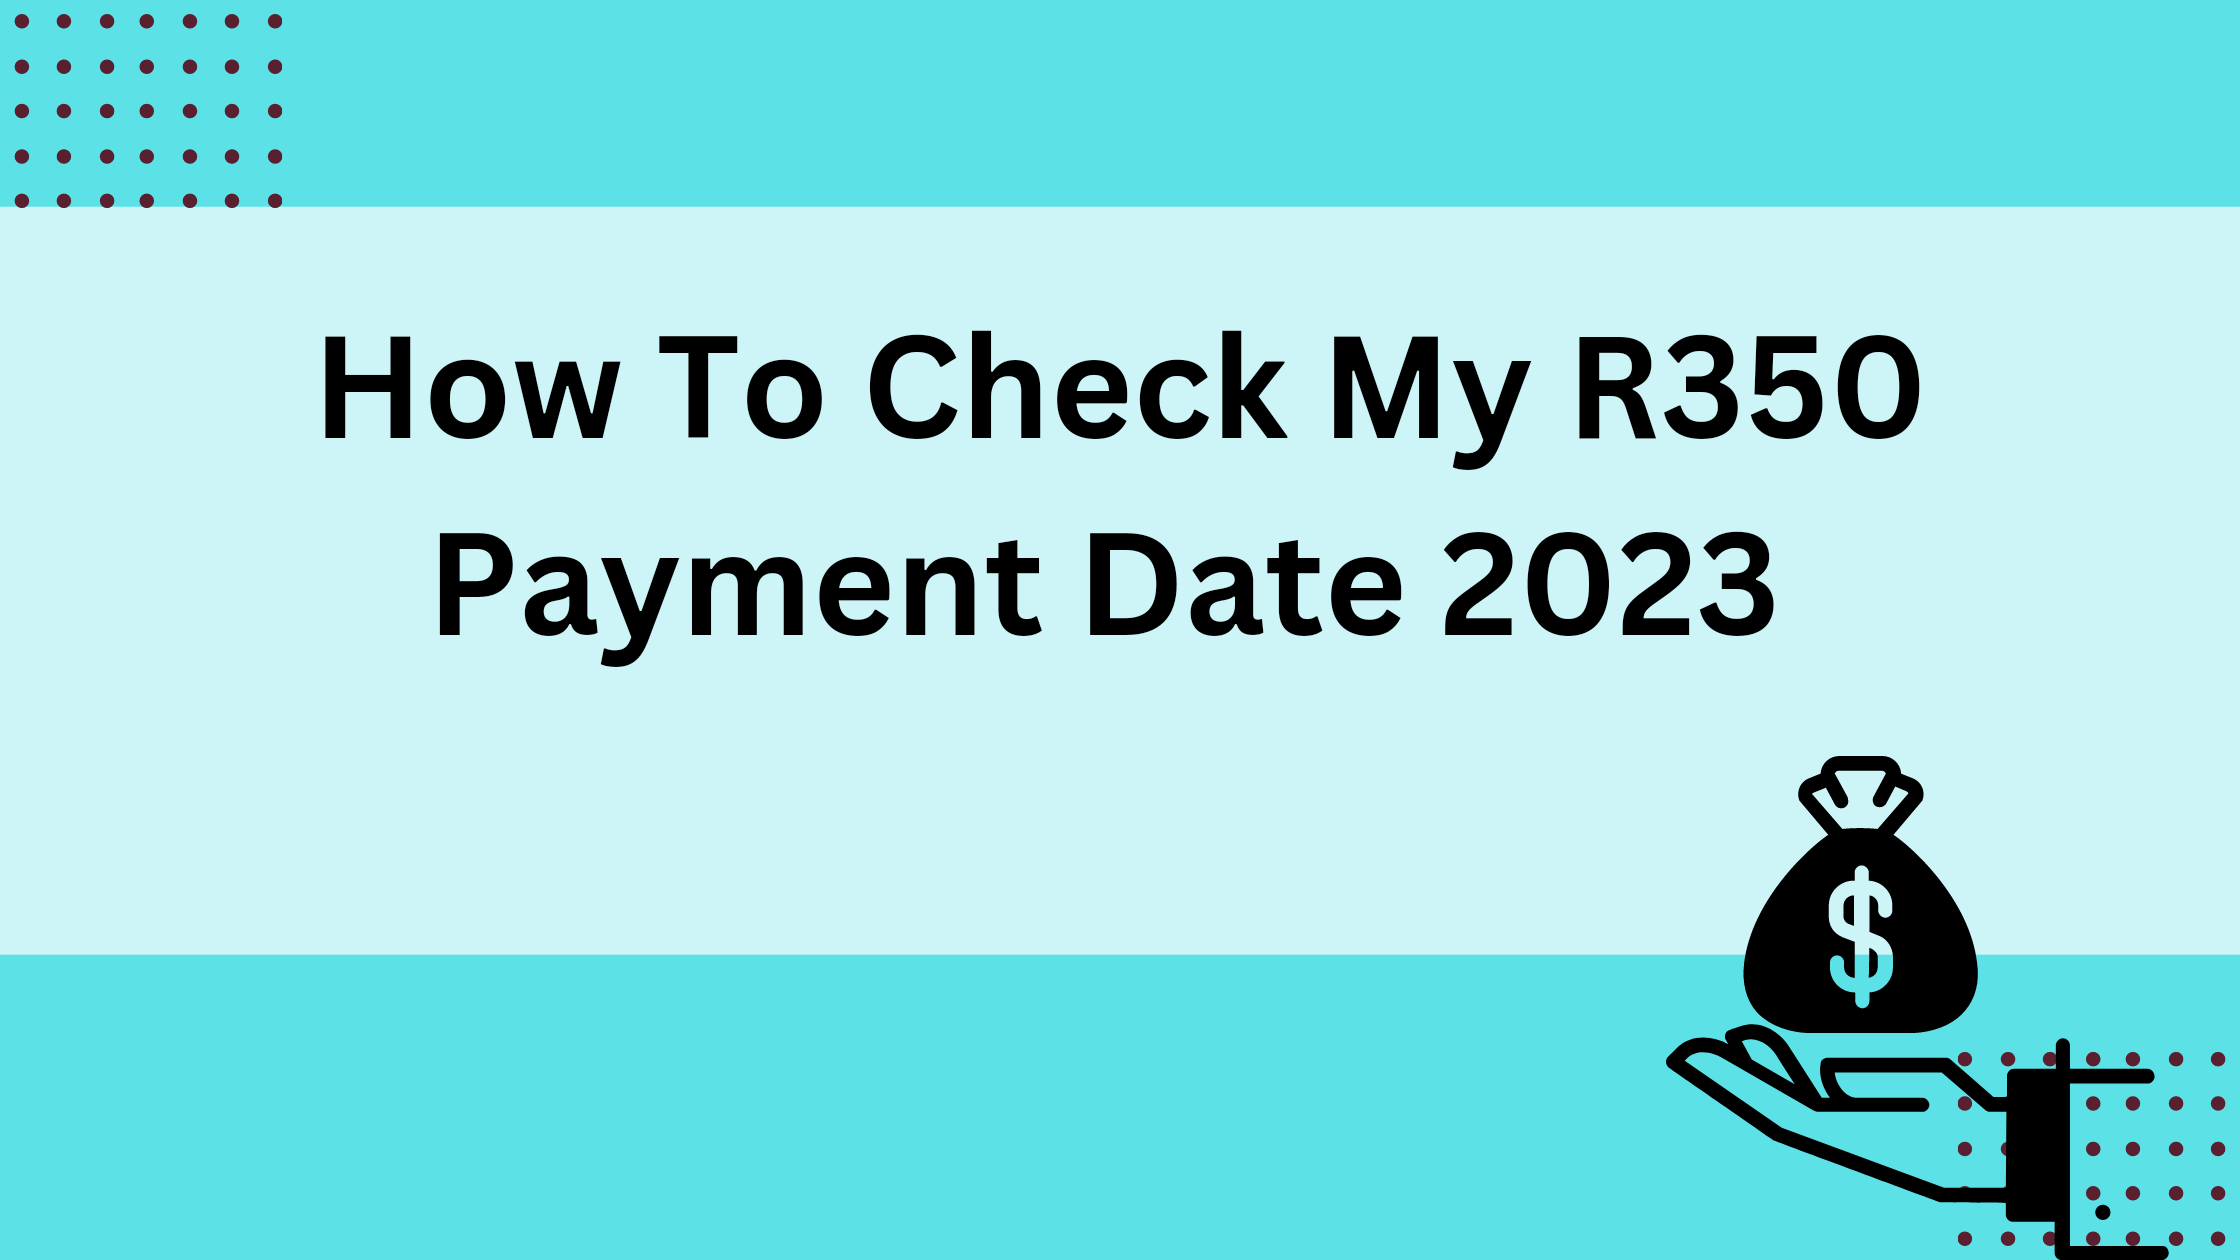 How To Check My R350 Payment Date 2023